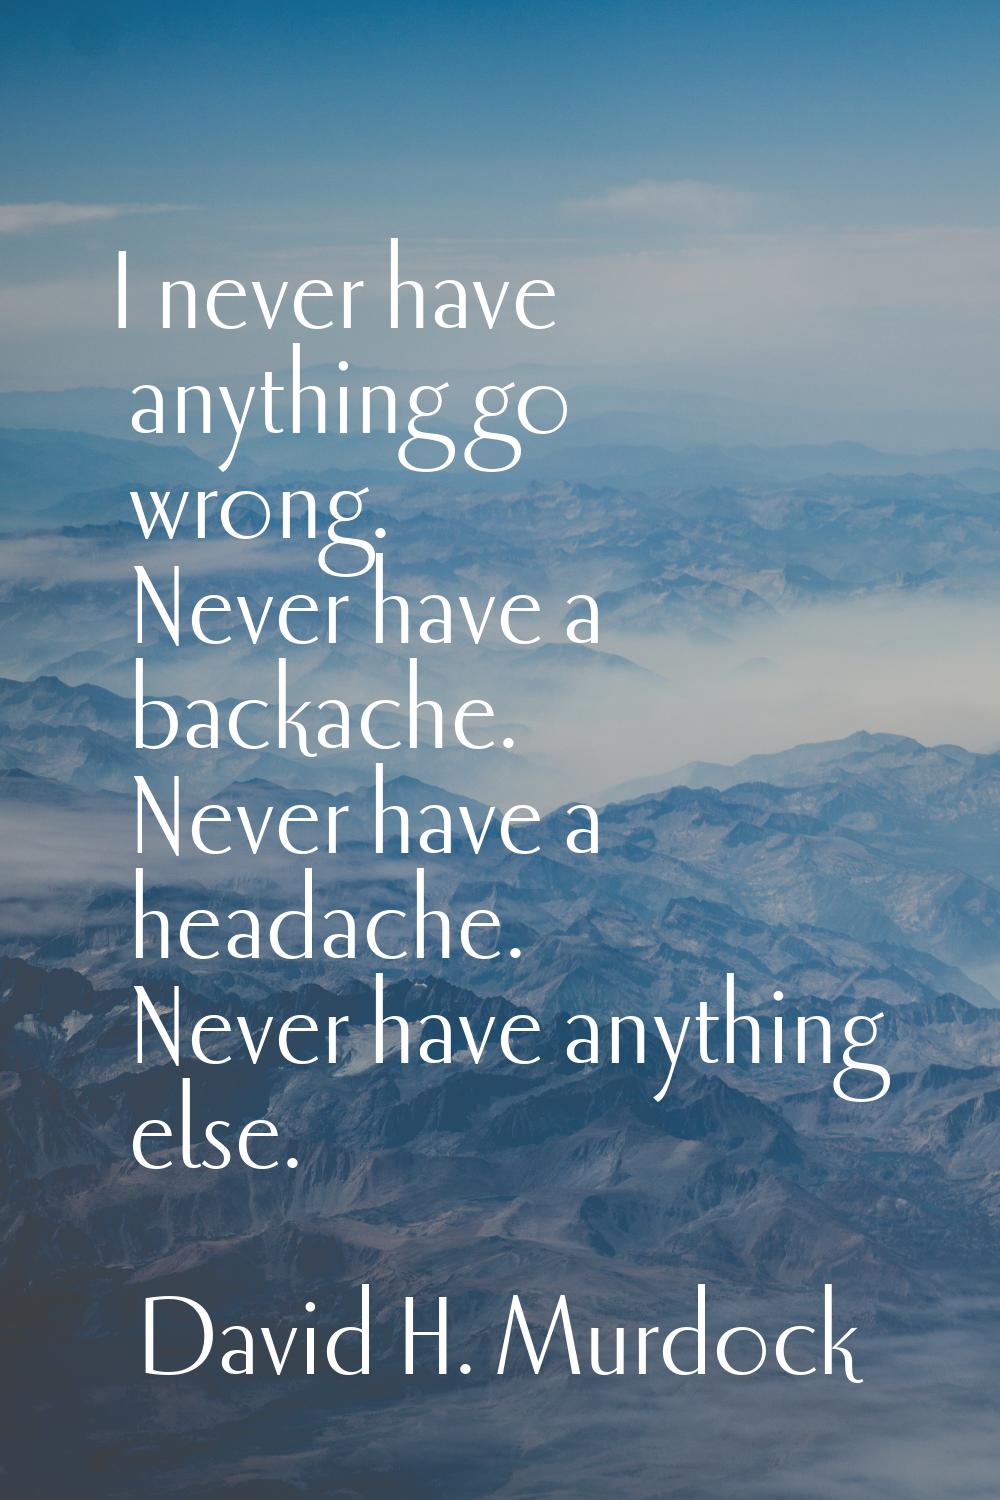 I never have anything go wrong. Never have a backache. Never have a headache. Never have anything e